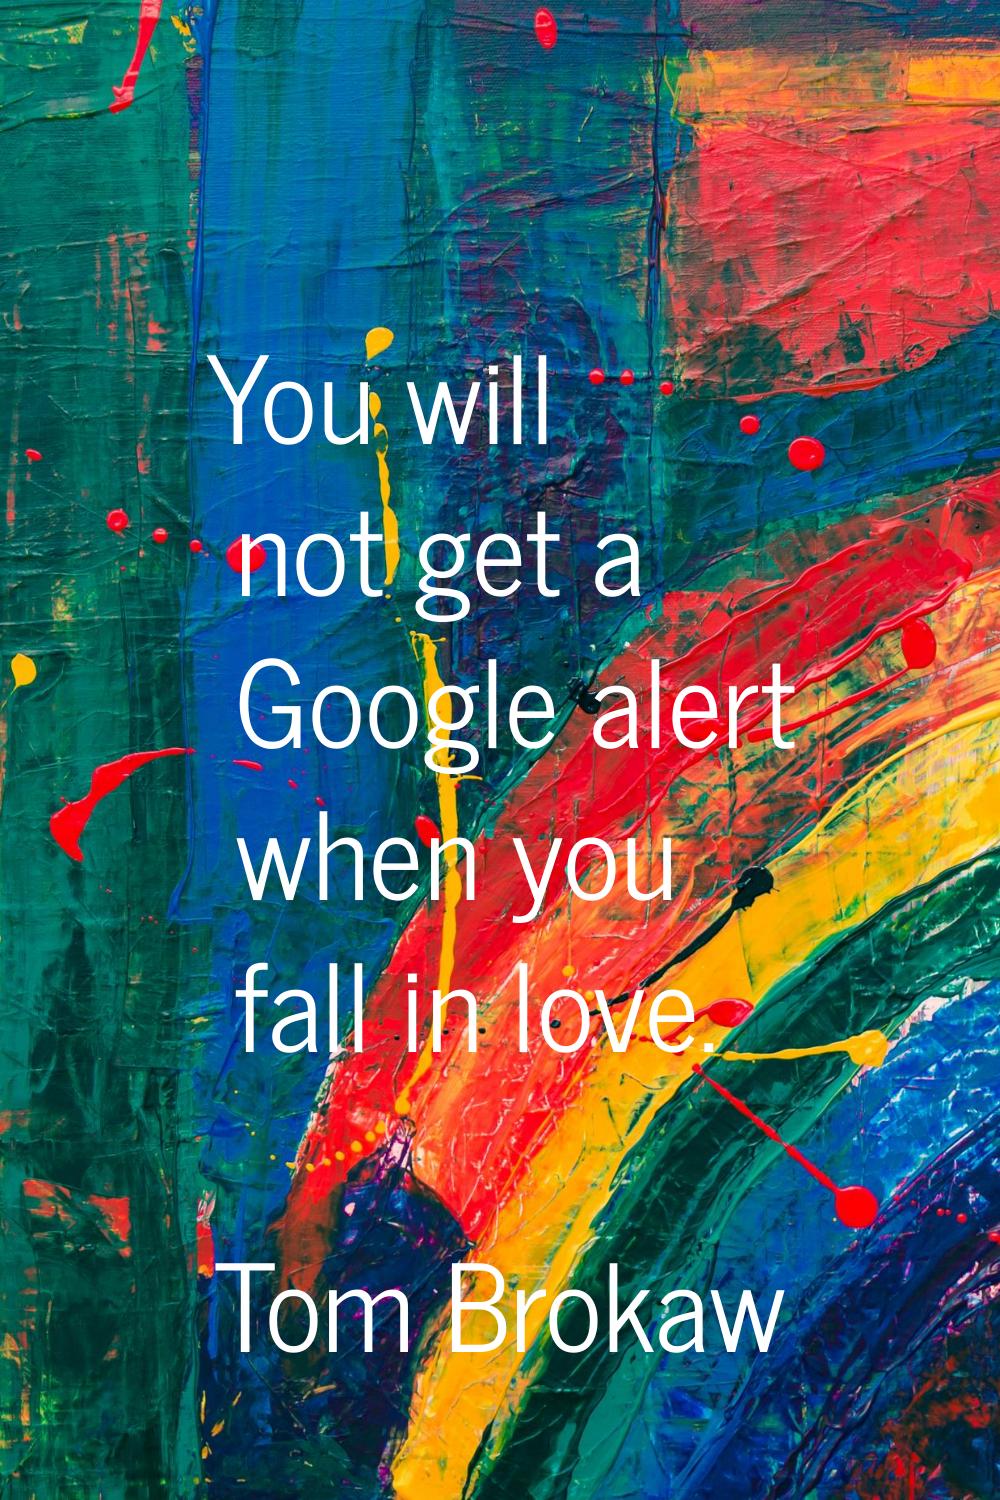 You will not get a Google alert when you fall in love.